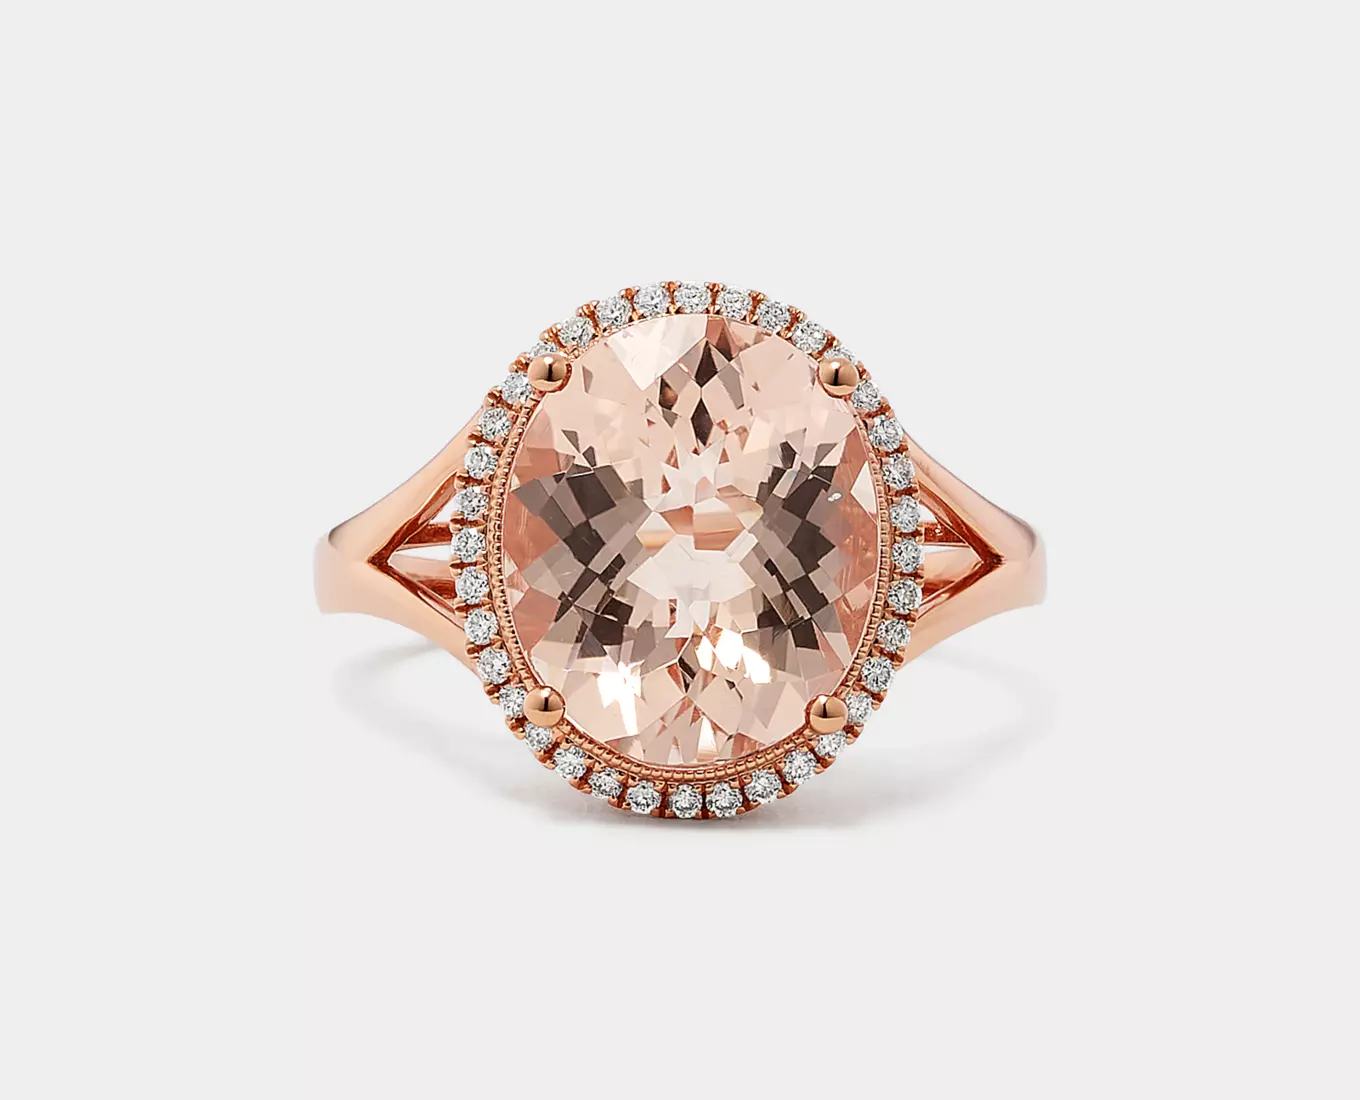 Rosita Morganite & Diamond Halo Ring
Steal the show with this stunning natural morganite cocktail ring. A halo of natural diamonds beautifully highlights the morganite gemstone. Crafted in vivid 14-karat rose gold, it features ornate touches, with delicate milgrain detailing in the halo and around the sides.